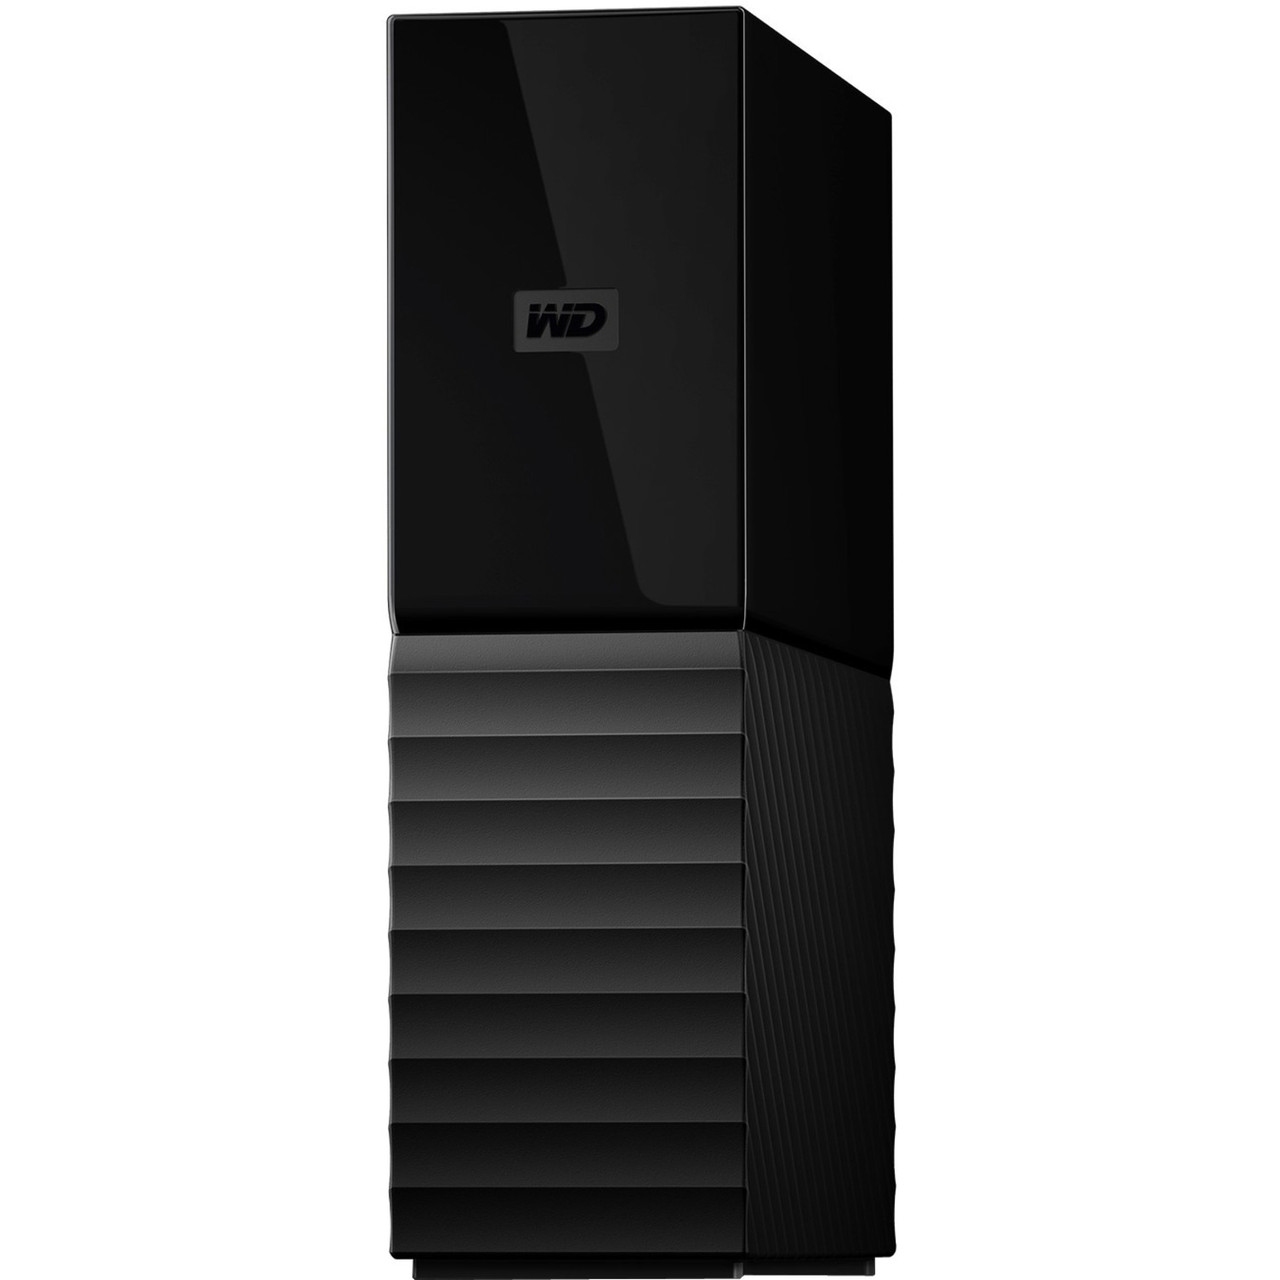 WD My Book 6TB USB 3.0 desktop hard drive with password protection